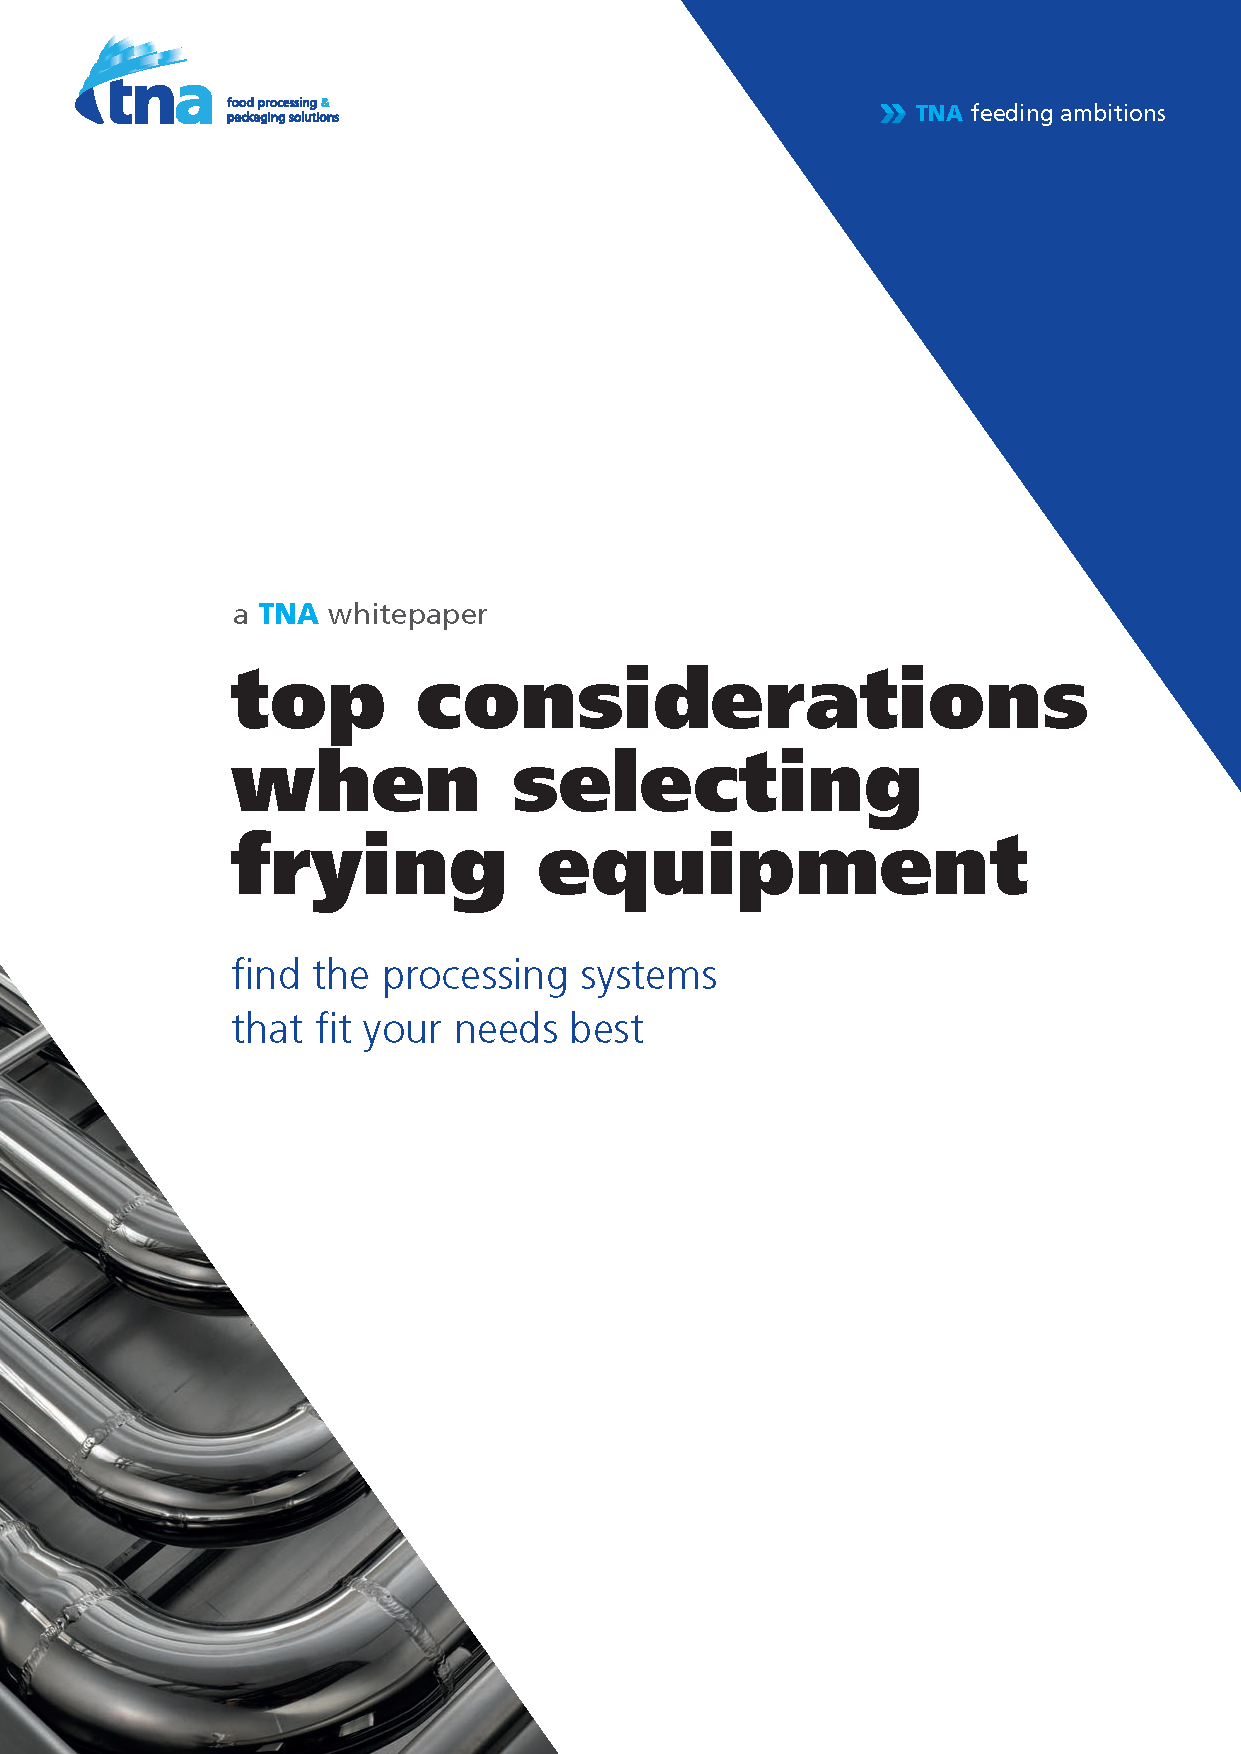 Top Considerations when Selecting Frying Equipment